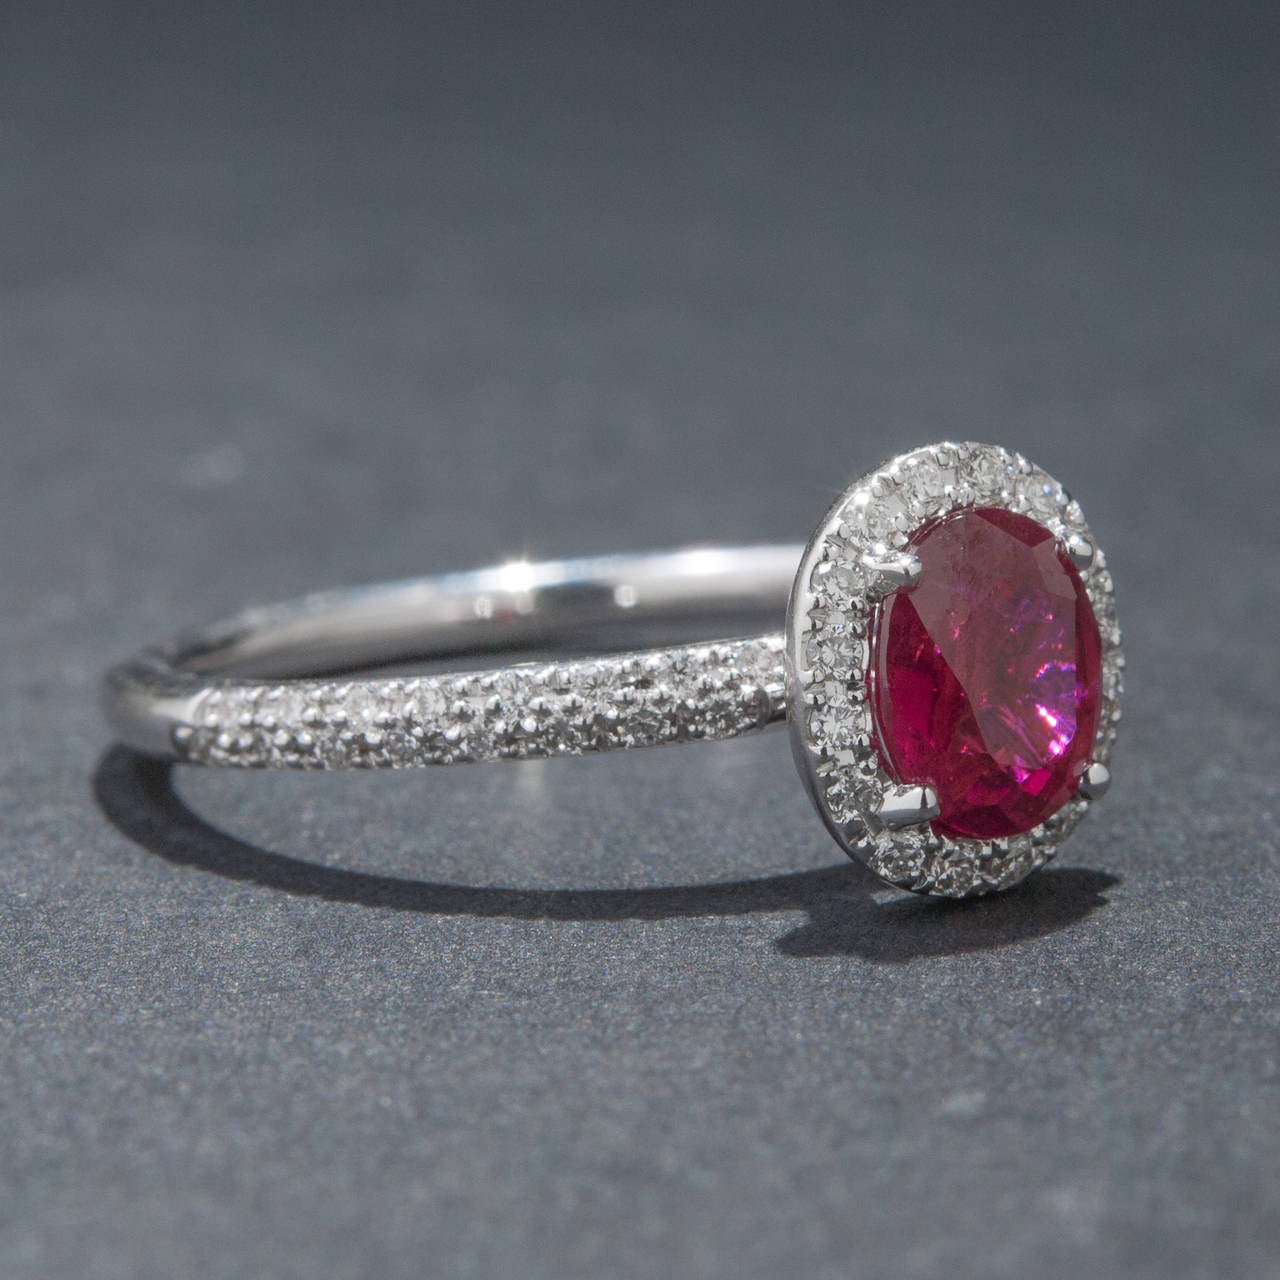 A vibrant and eye-catching ring with a .83 carat oval cut ruby at its center. The center stone is surrounded by 48 accent diamonds weighing a total of .22 carats. The ring is made in 18k white gold and it is currently size 6 1/4.